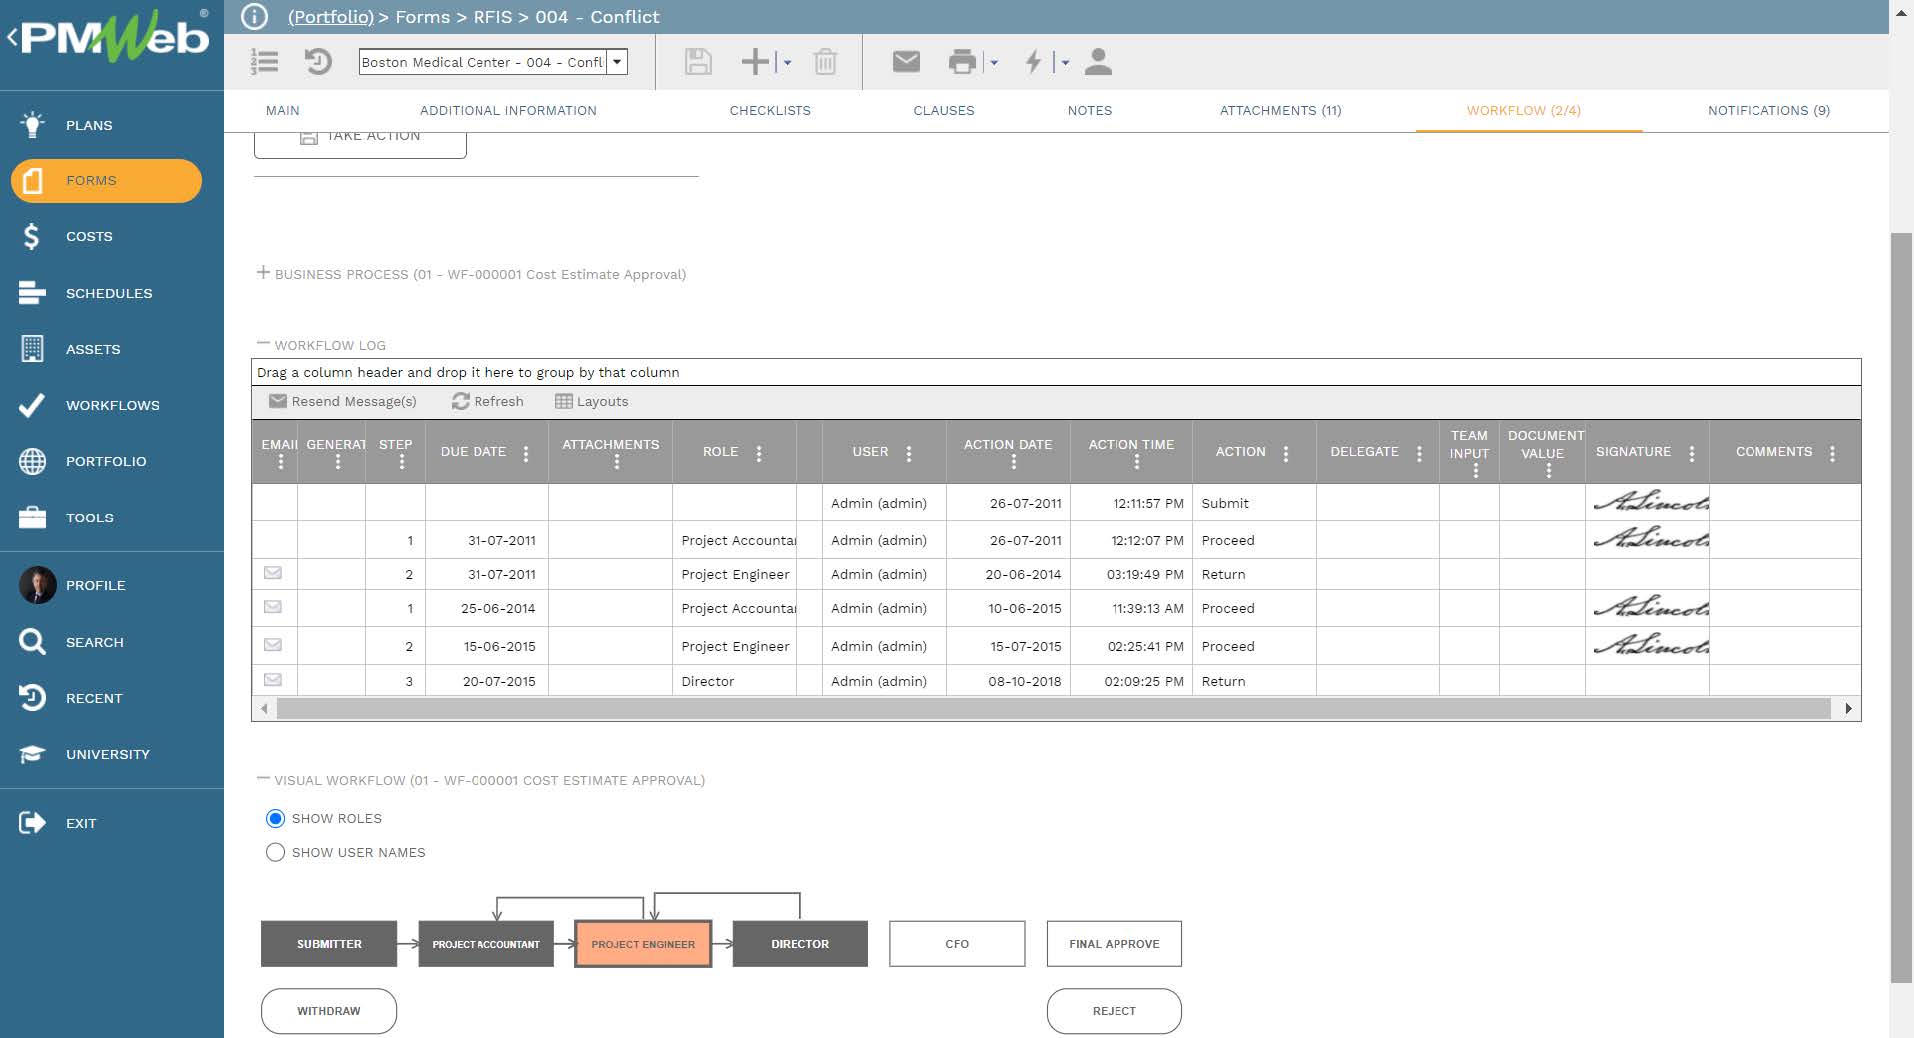 PMWeb 7 Forms RFIs Conflict 
Workflow 